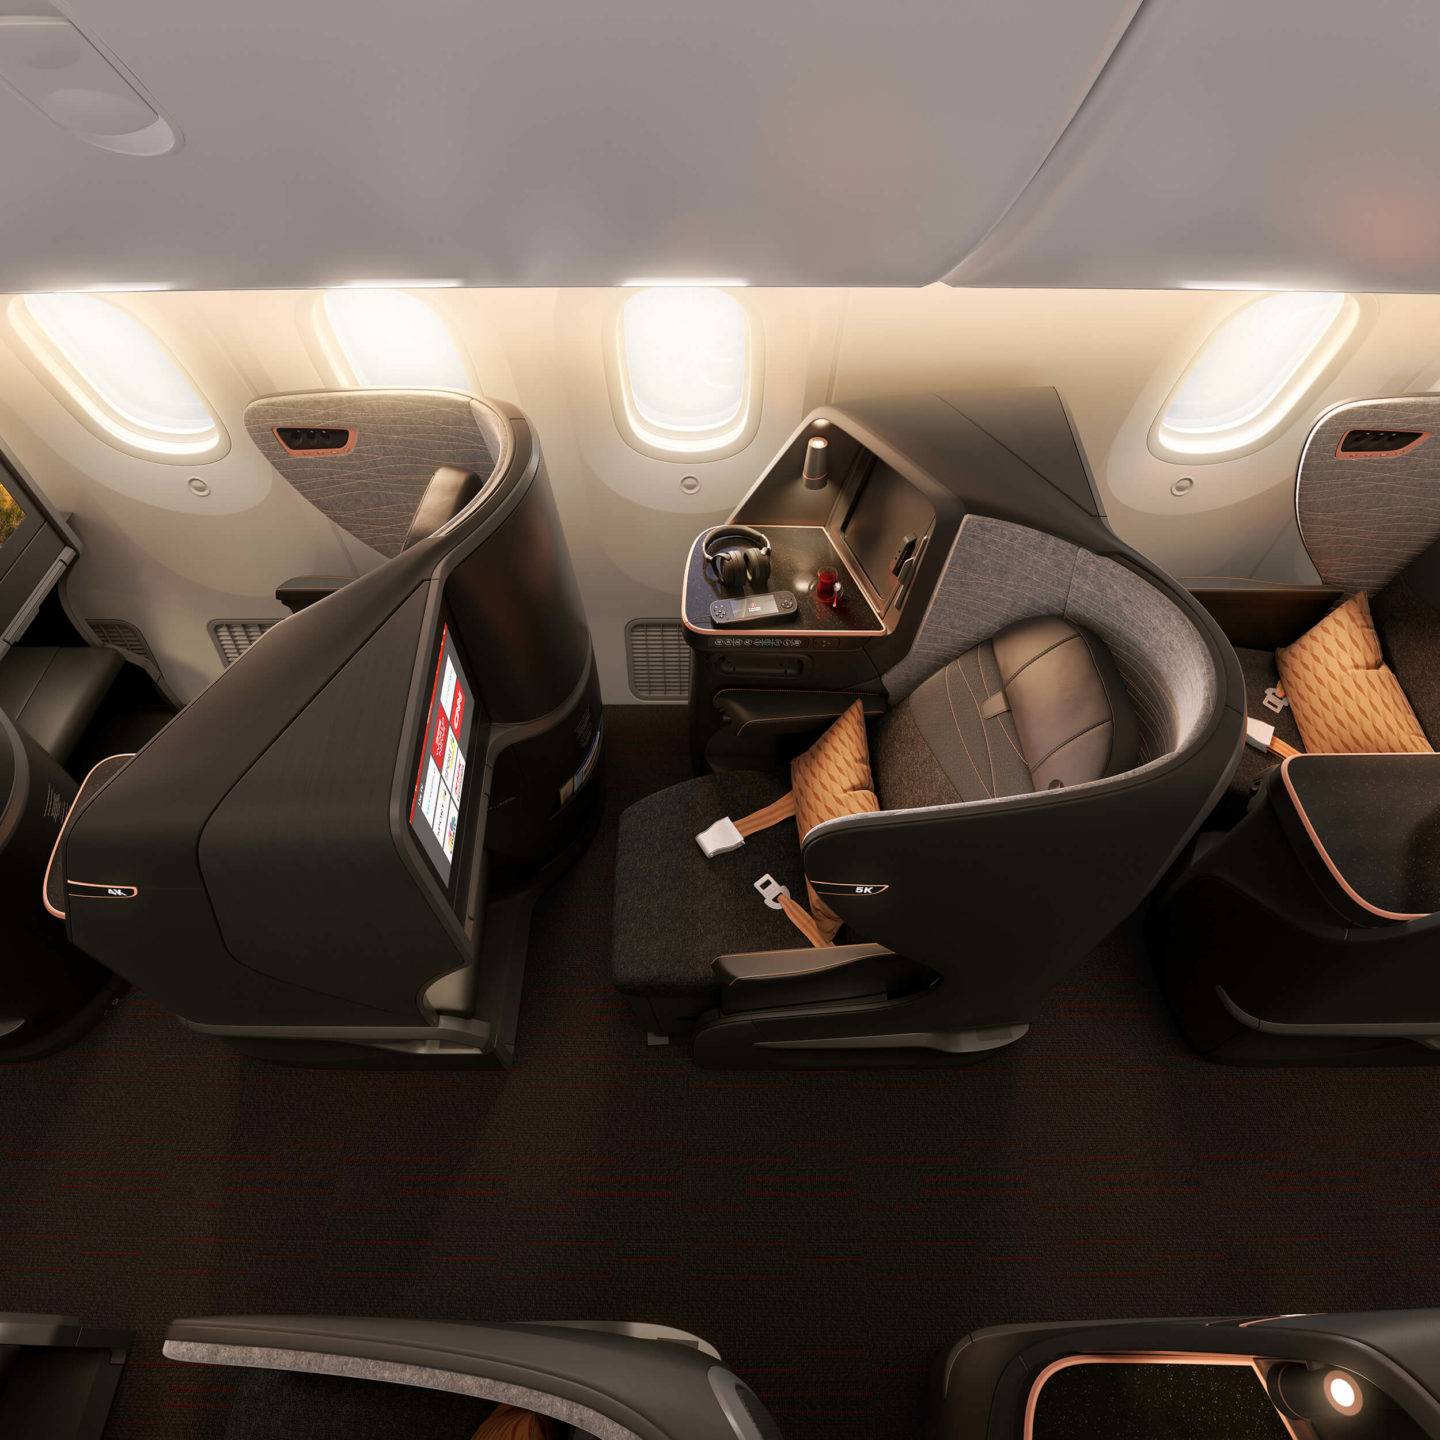 Overhead view of a business class seat